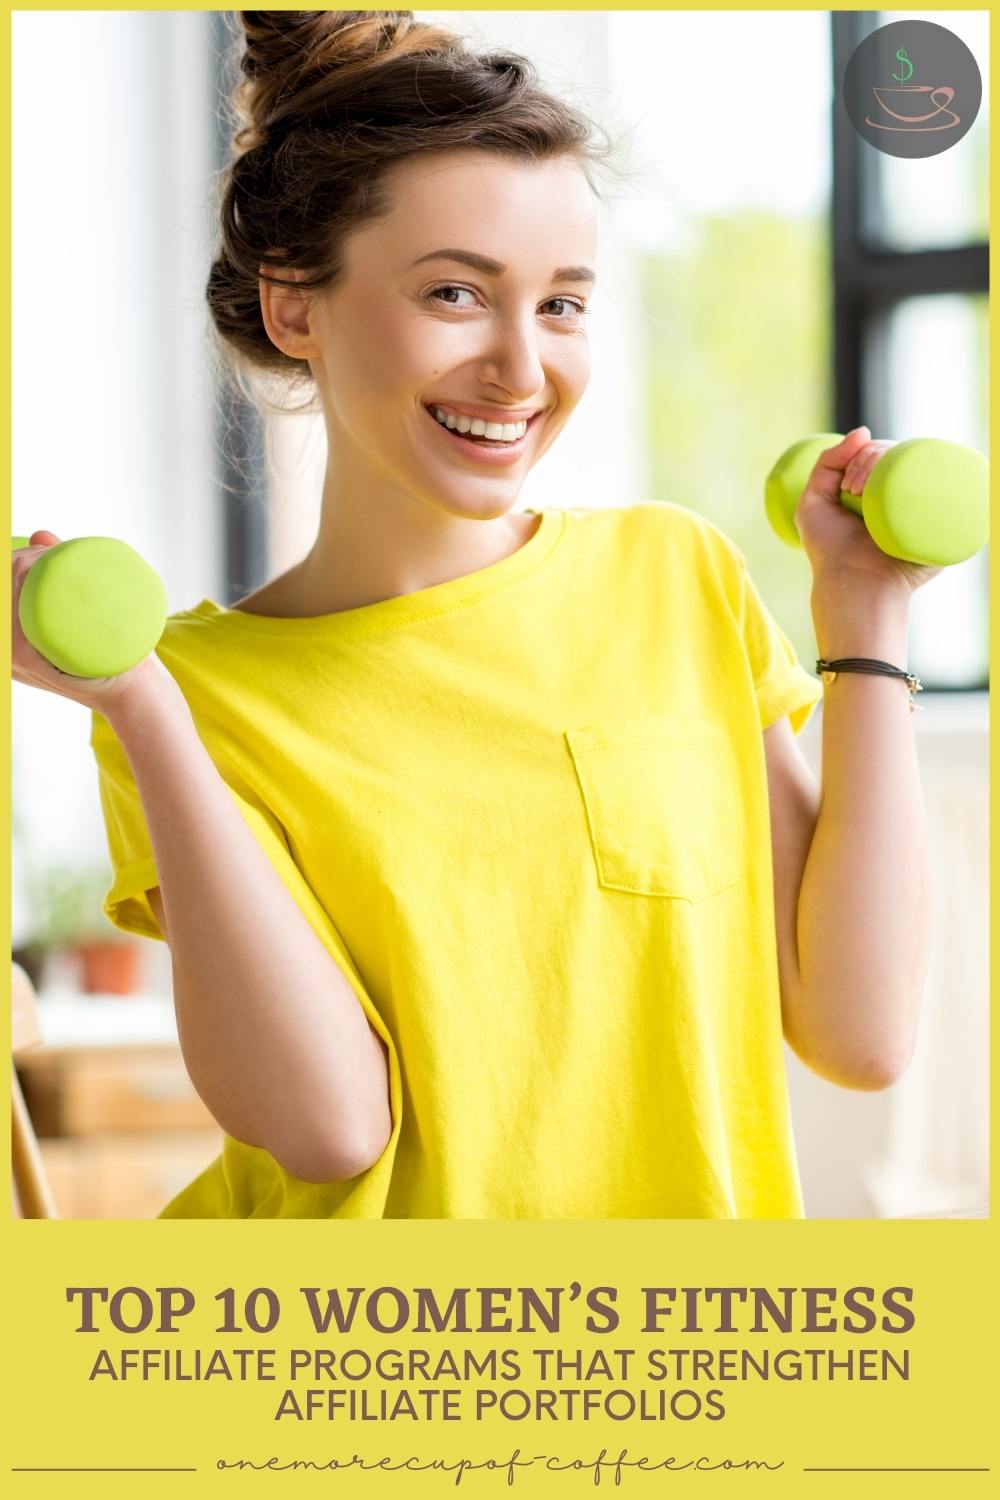 smiling woman in yellow top holding a yellow green small dumbbell in each hand, with text at the bottom in yellow green banner 